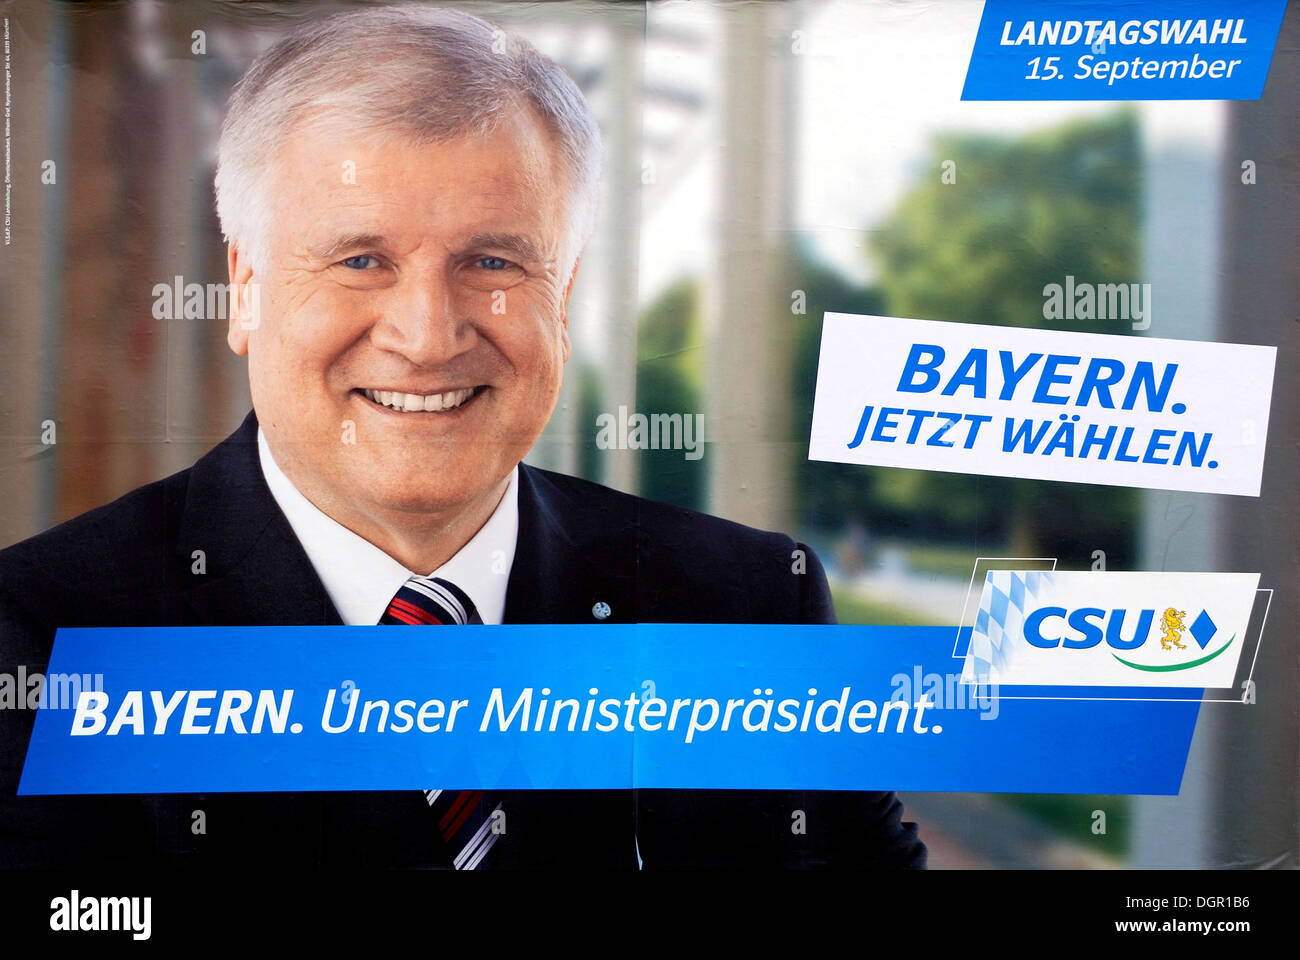 Poster advertising the CSU for the Bavarian Prime Minister Horst Seehofer for state elections in Bavaria on 15.09.2013. Stock Photo